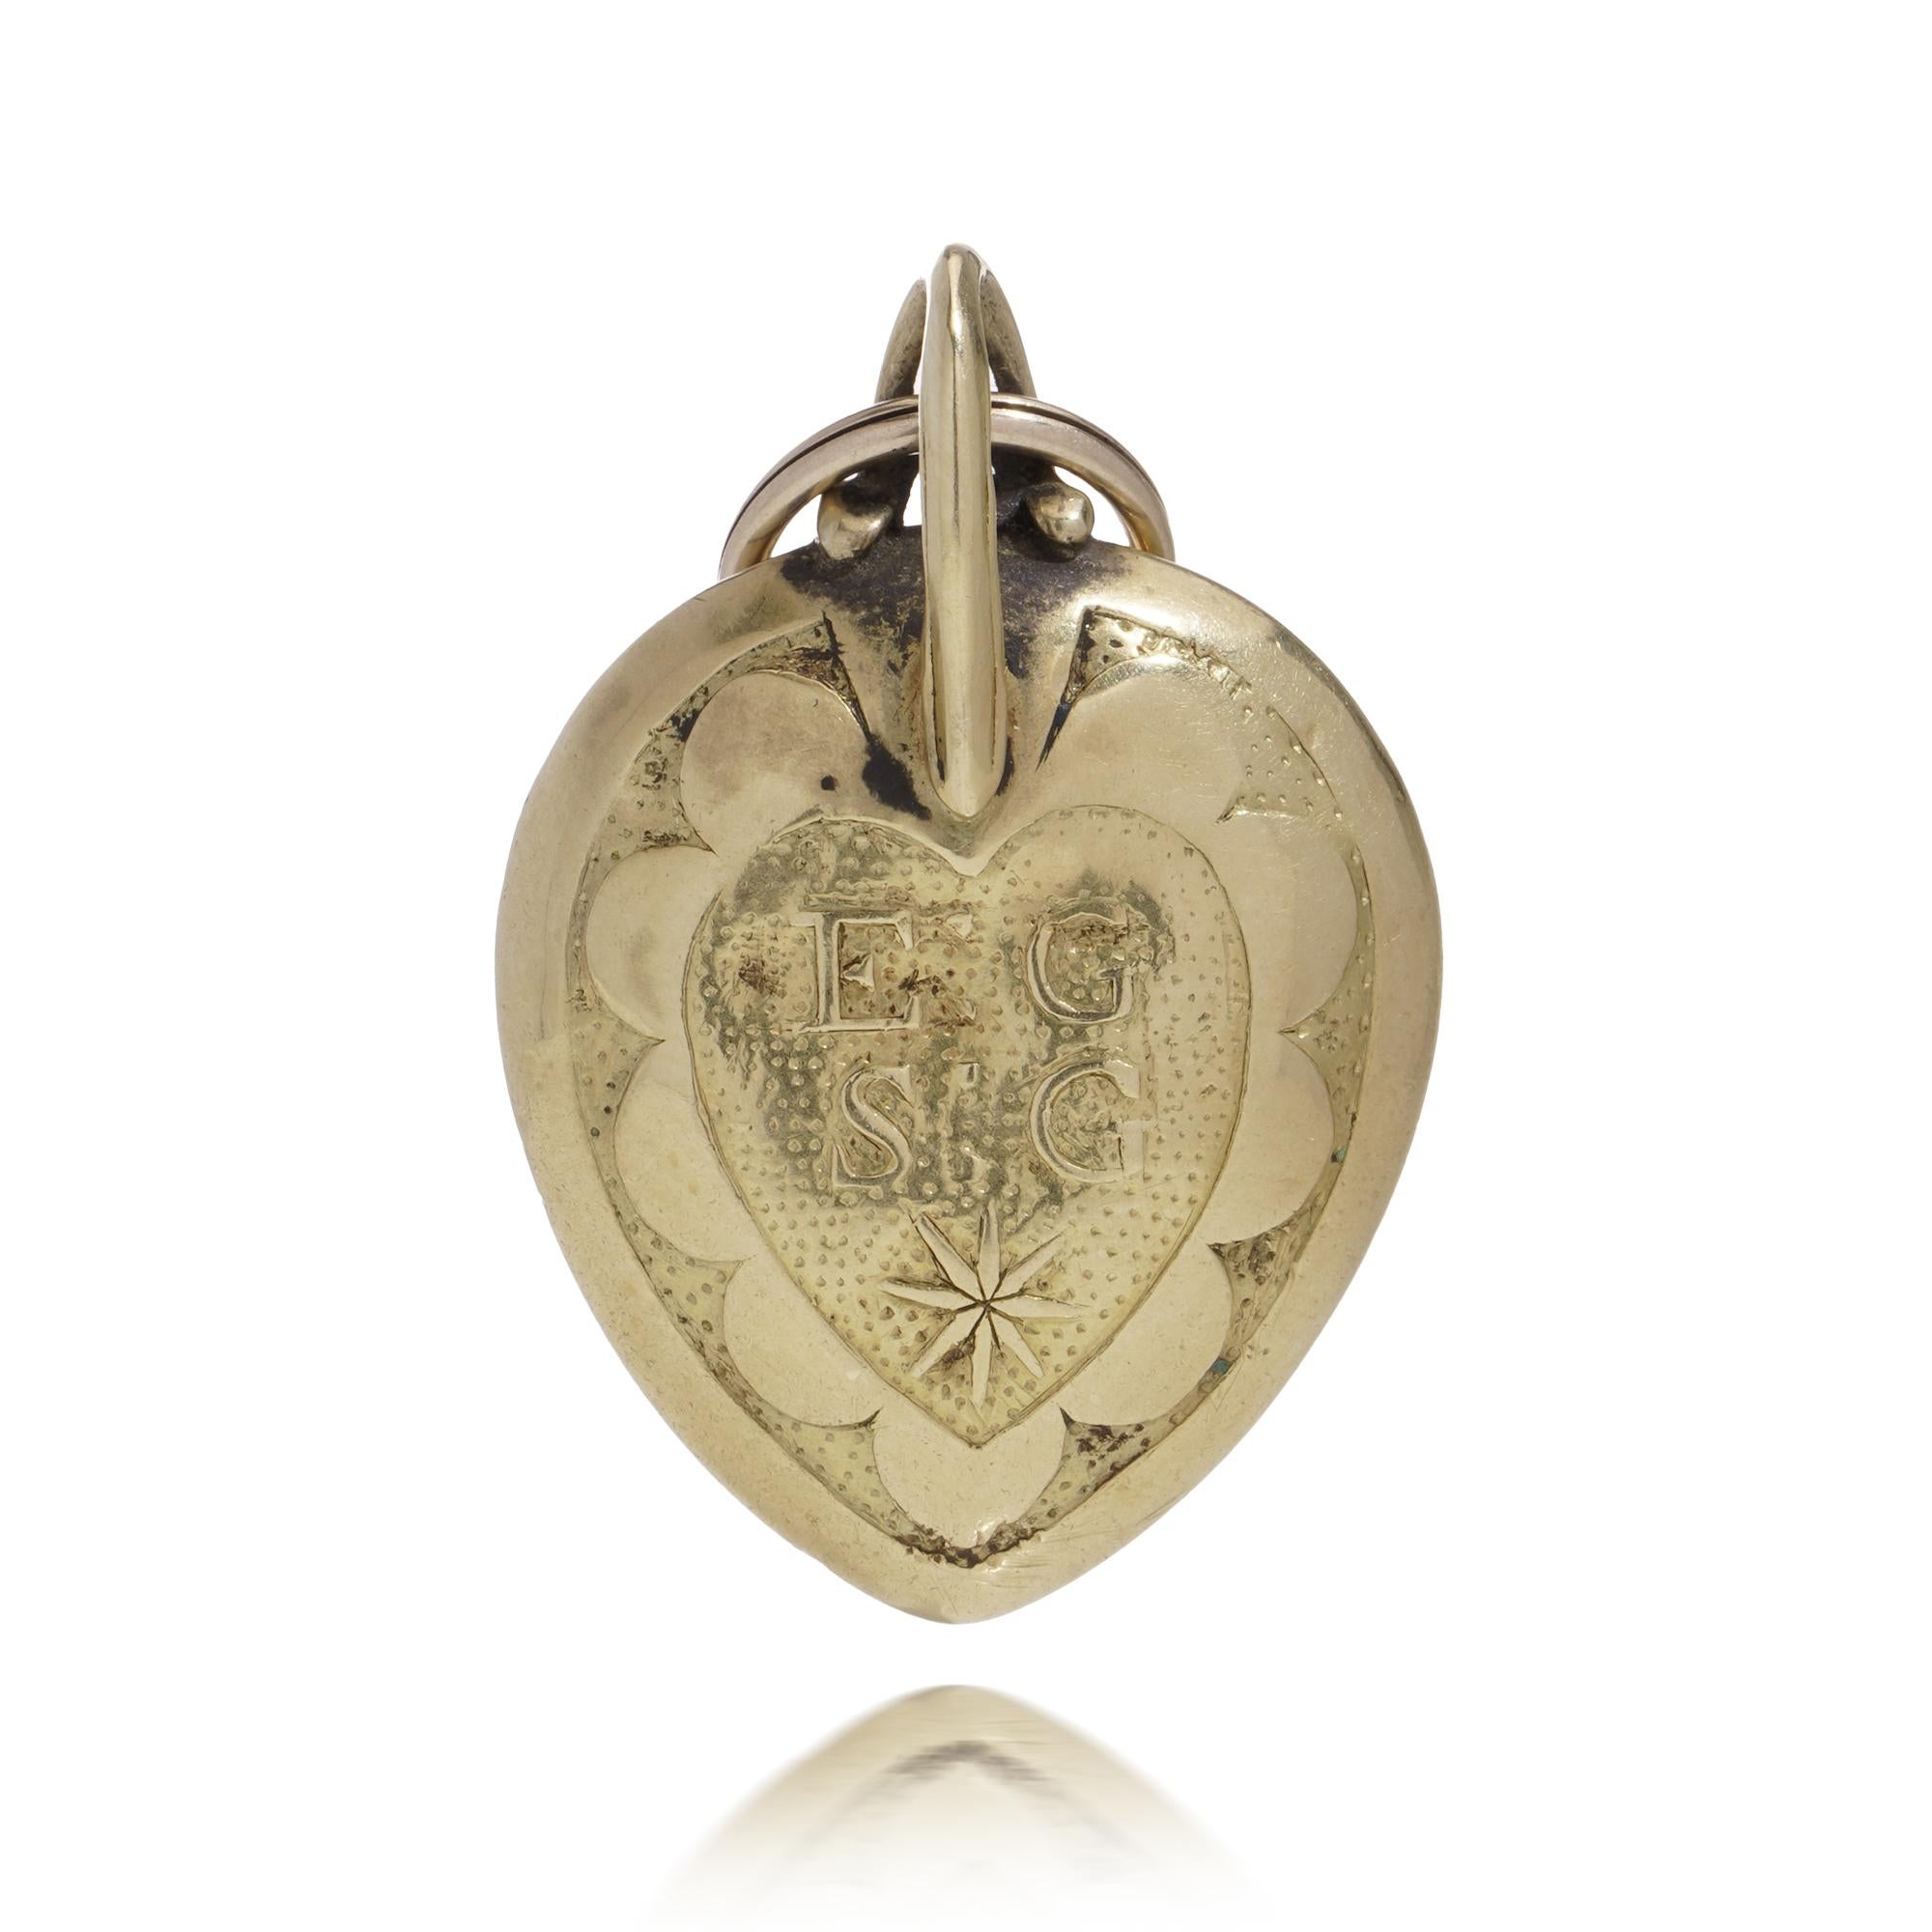 This is an exquisite Stuart Crystal memorial locket from the 17th and early 18th century. Crafted in 18kt yellow gold, this mourning pendant features a rock crystal center adorned with intricately woven hair. On the reverse side of the gold casing,